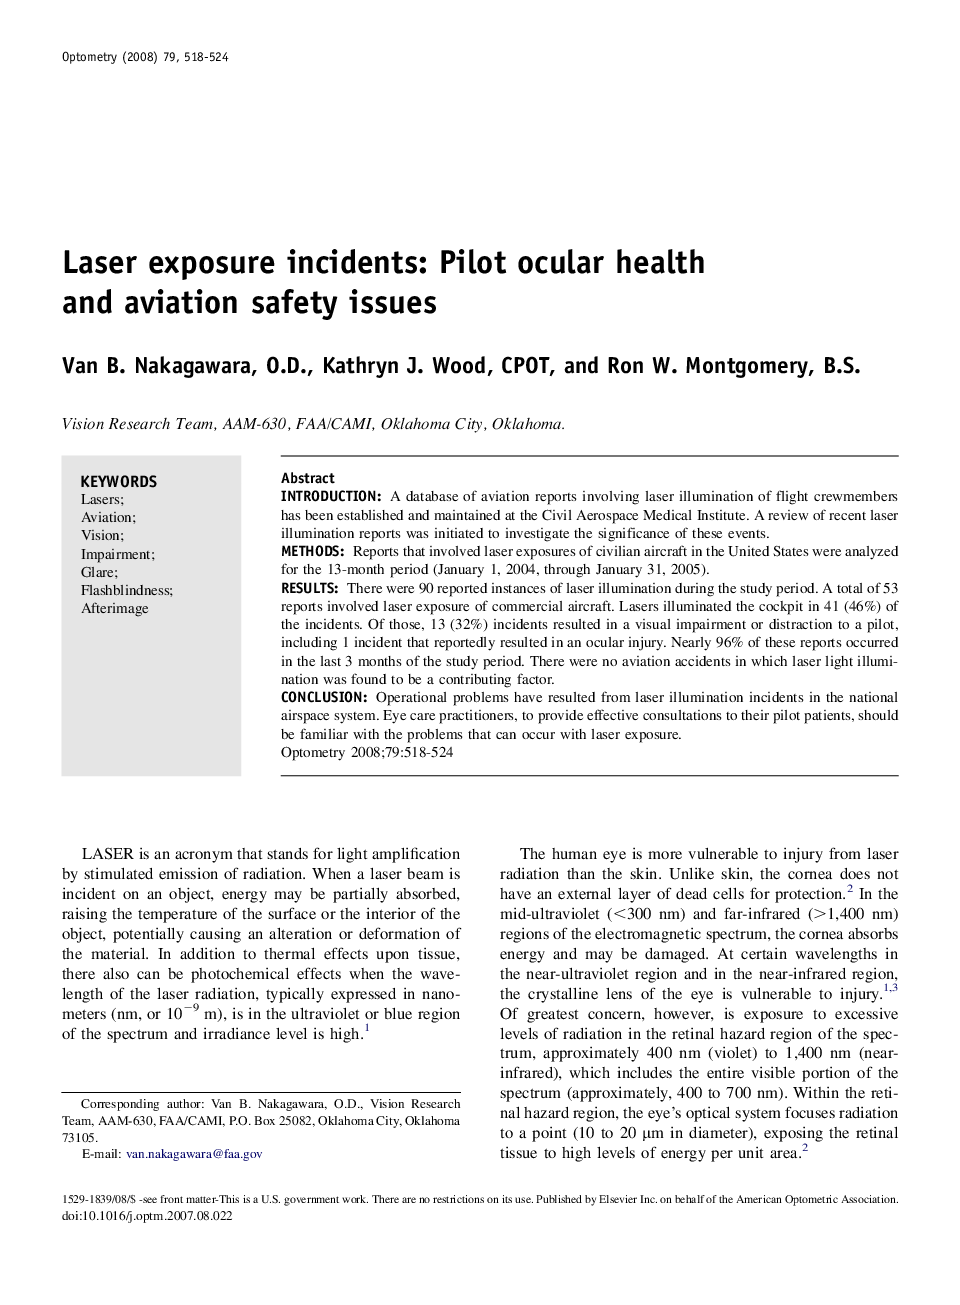 Laser exposure incidents: Pilot ocular health and aviation safety issues